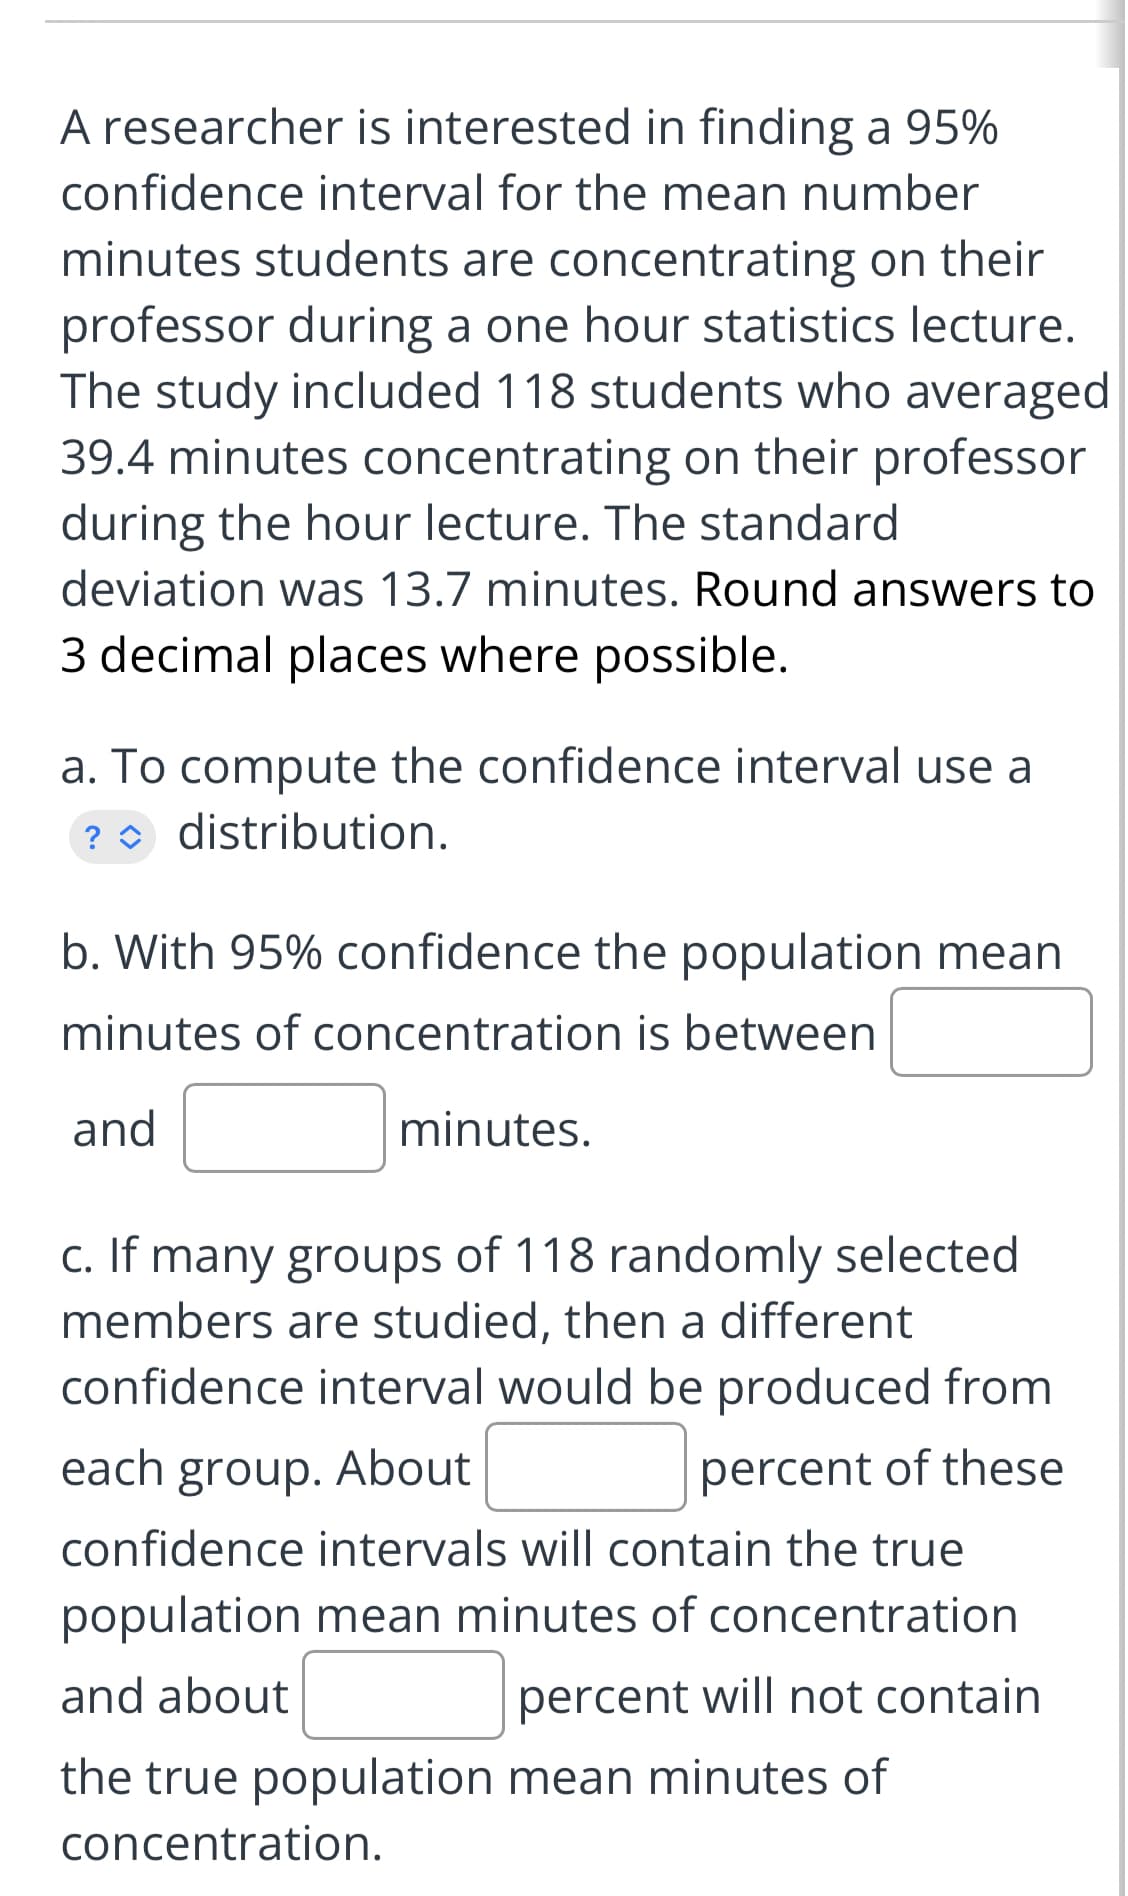 A researcher is interested in finding a 95%
confidence interval for the mean number
minutes students are concentrating on their
professor during a one hour statistics lecture.
The study included 118 students who averaged
39.4 minutes concentrating on their professor
during the hour lecture. The standard
deviation was 13.7 minutes. Round answers to
3 decimal places where possible.
a. To compute the confidence interval use a
distribution.
?
b. With 95% confidence the population mean
minutes of concentration is between
and
minutes.
c. If many groups of 118 randomly selected
members are studied, then a different
confidence interval would be produced from
each group. About
percent of these
confidence intervals will contain the true
population mean minutes of concentration
and about
percent will not contain
the true population mean minutes of
concentration.